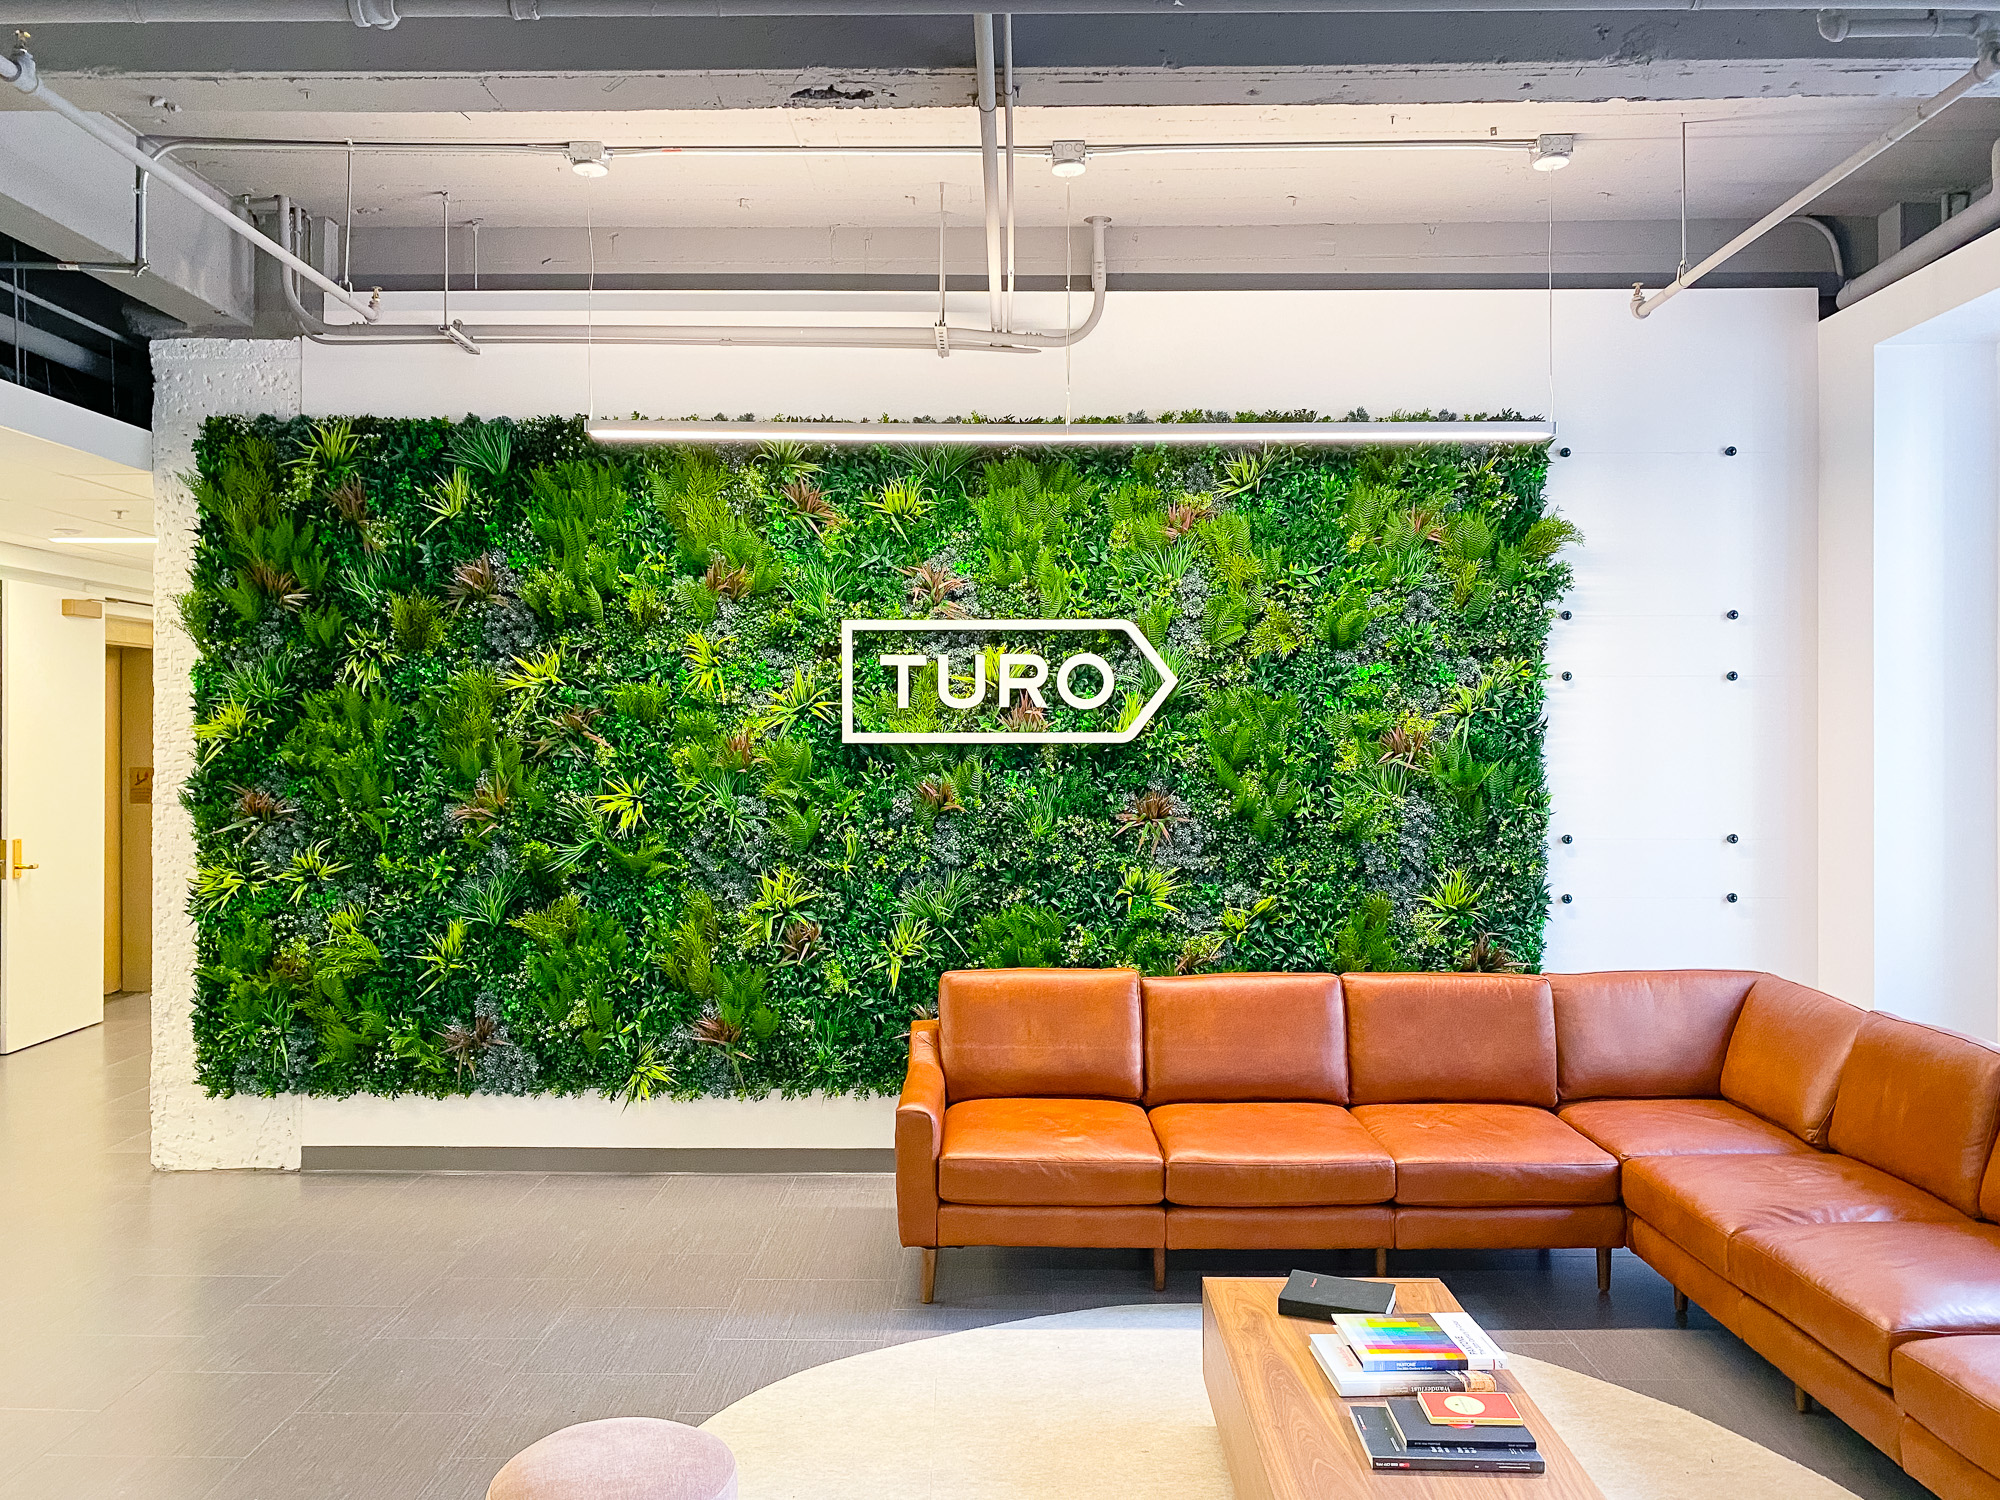 White dimensional logo on Vistagreen living wall for the lobby of Turo, an American peer-to-peer carsharing company.